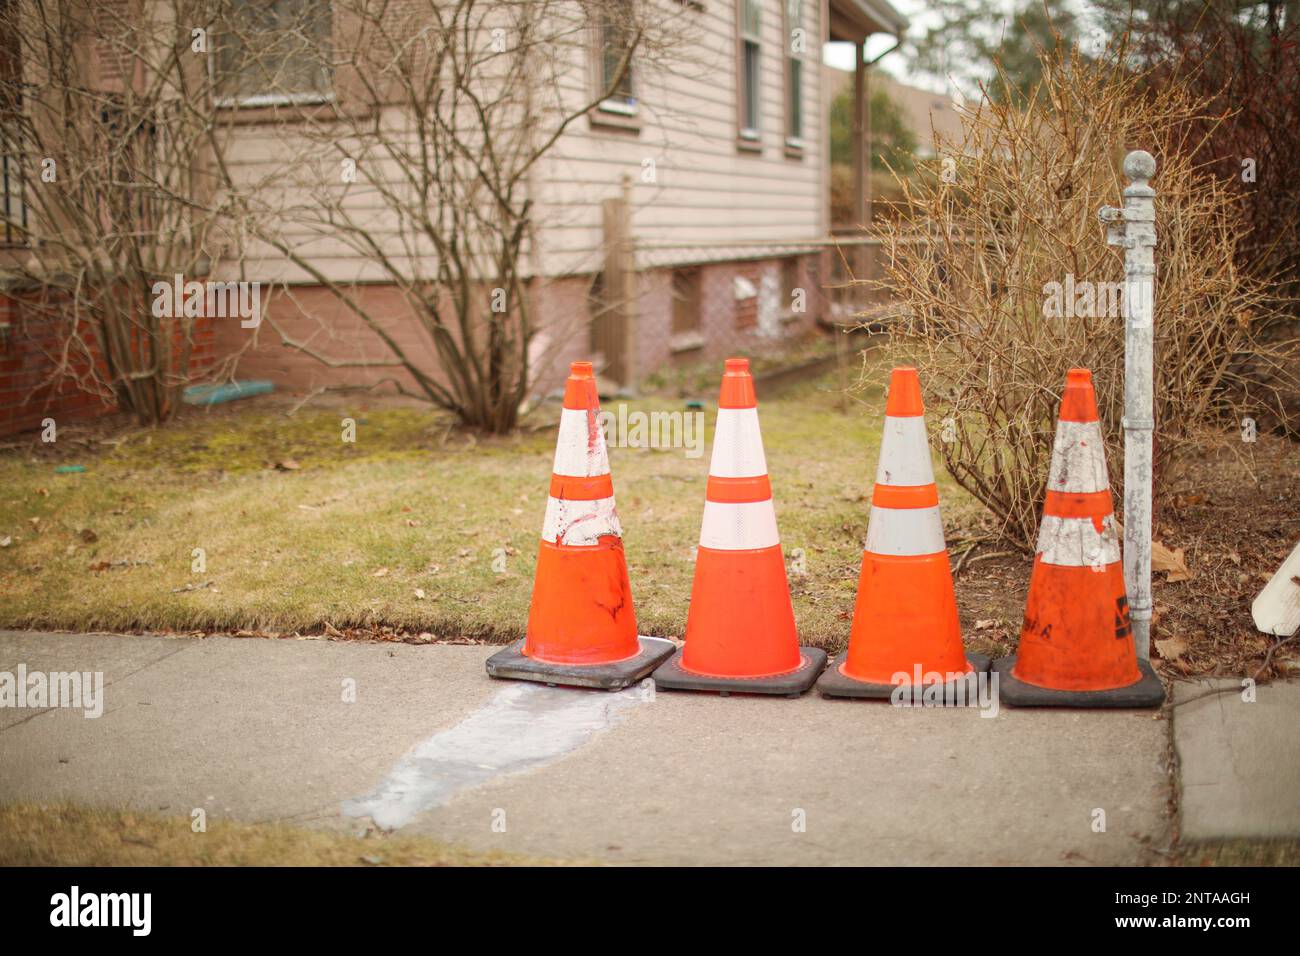 Construction cone in the street sidewalk showing caution during traffic Stock Photo